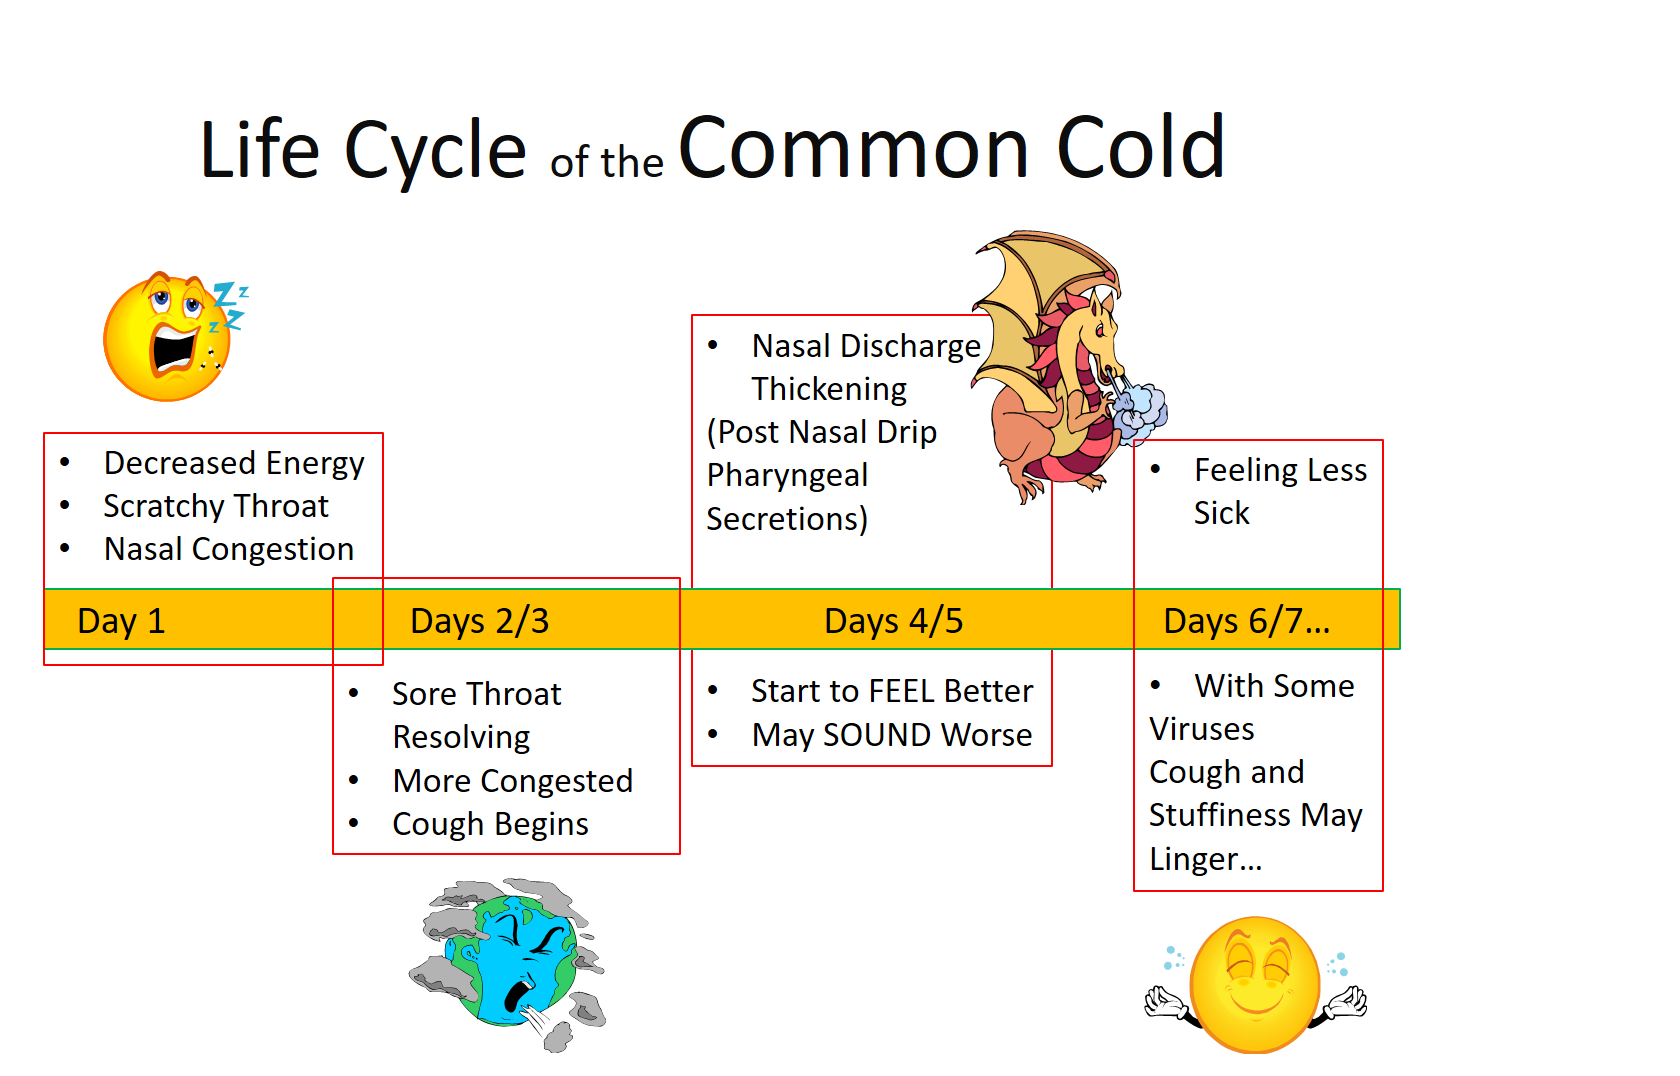 Life Cycle of the Common Cold